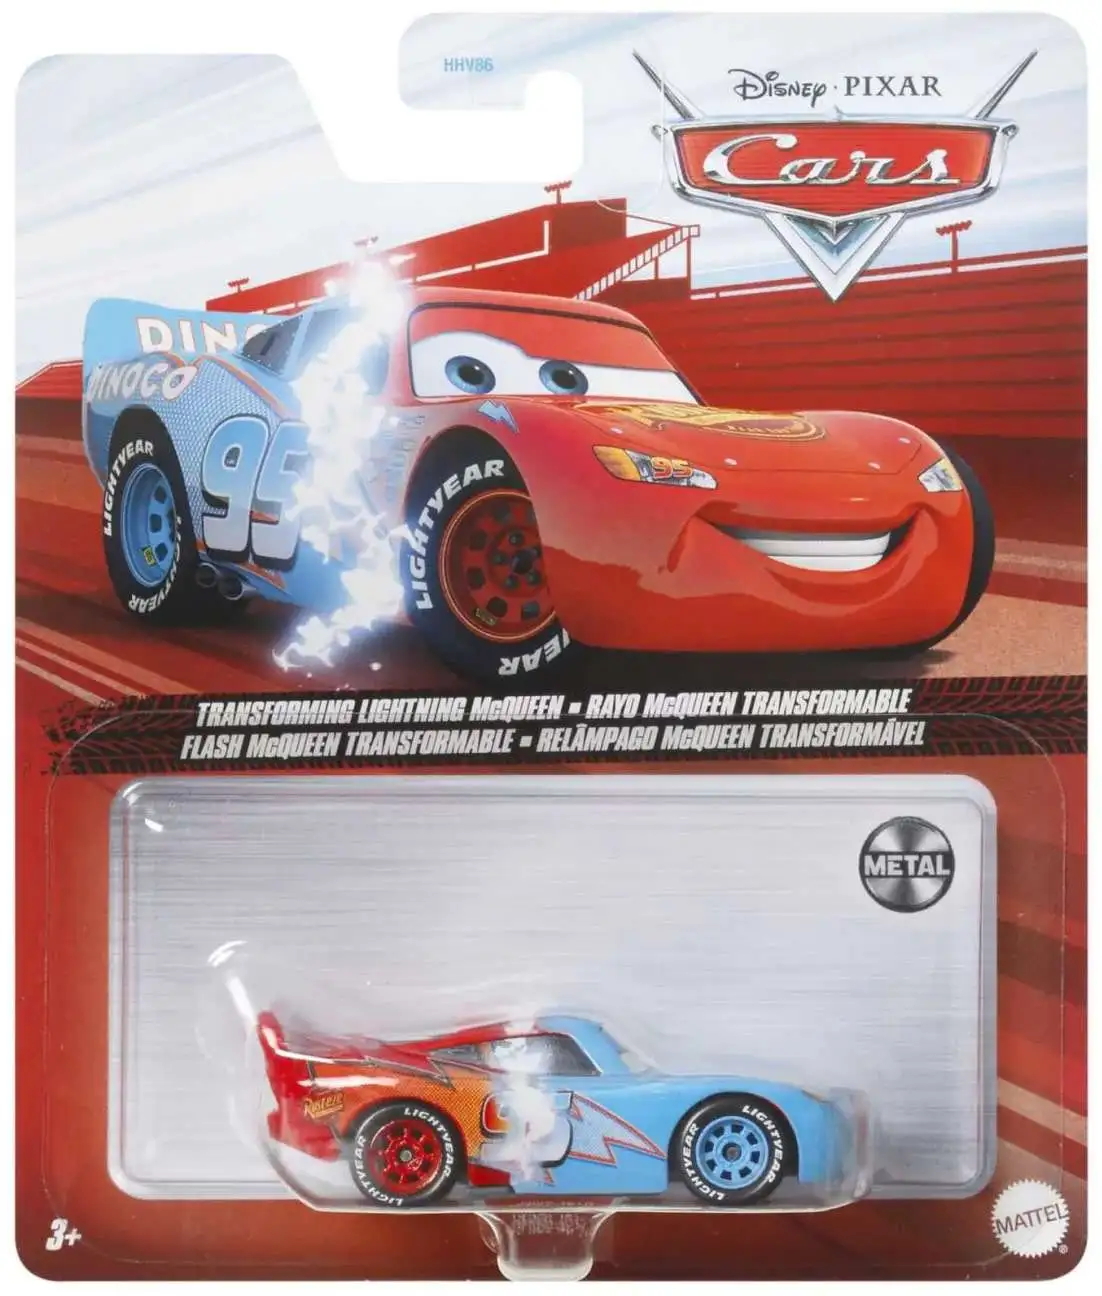 Free: Large Disney/Pixar CARS Dinoco Lightning McQueen Talking Race Car -  Plastic - 14 Long - Used - Cars & Trains -  Auctions for Free  Stuff